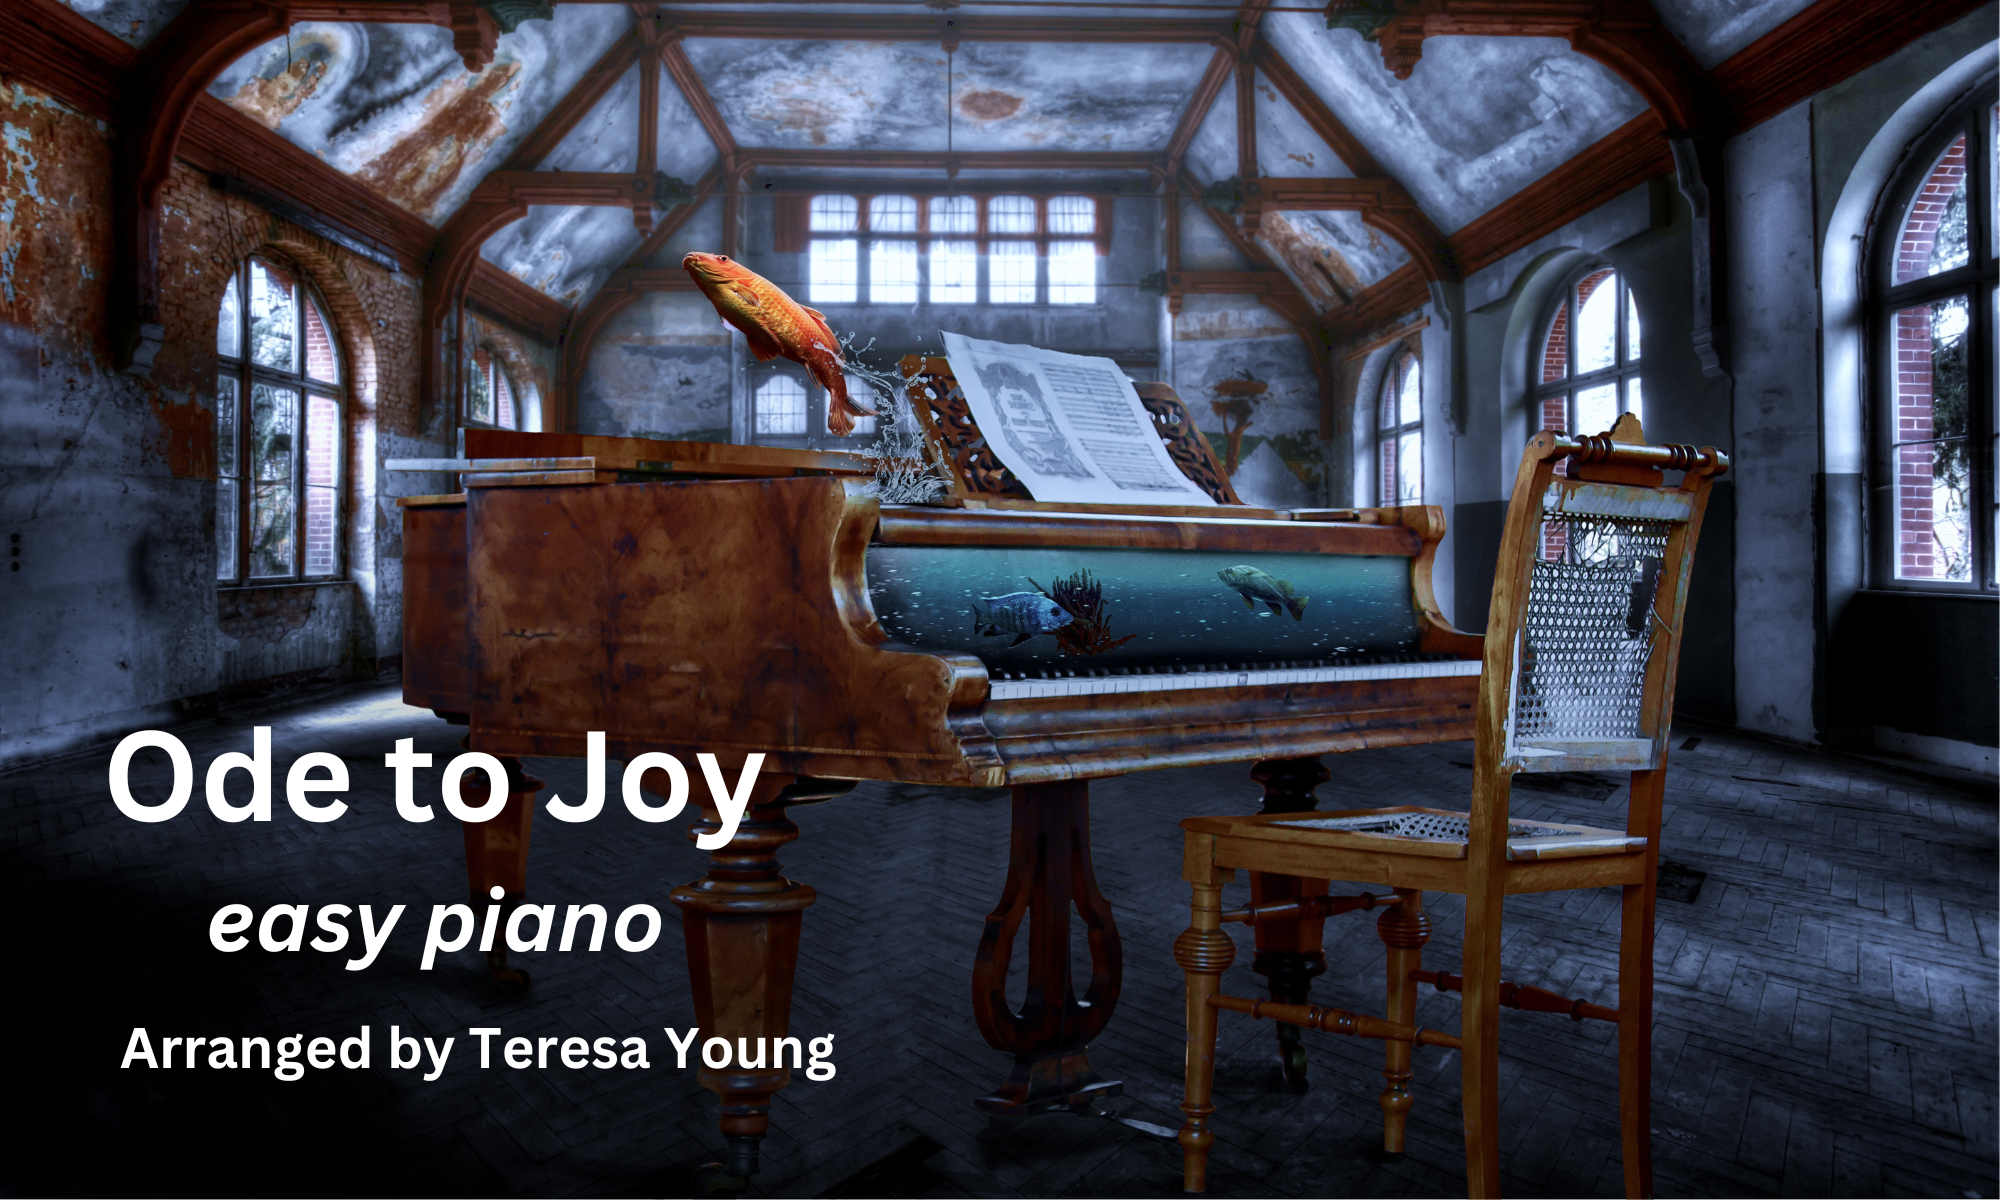 Ode to Joy, easy piano, arranged by Teresa Young